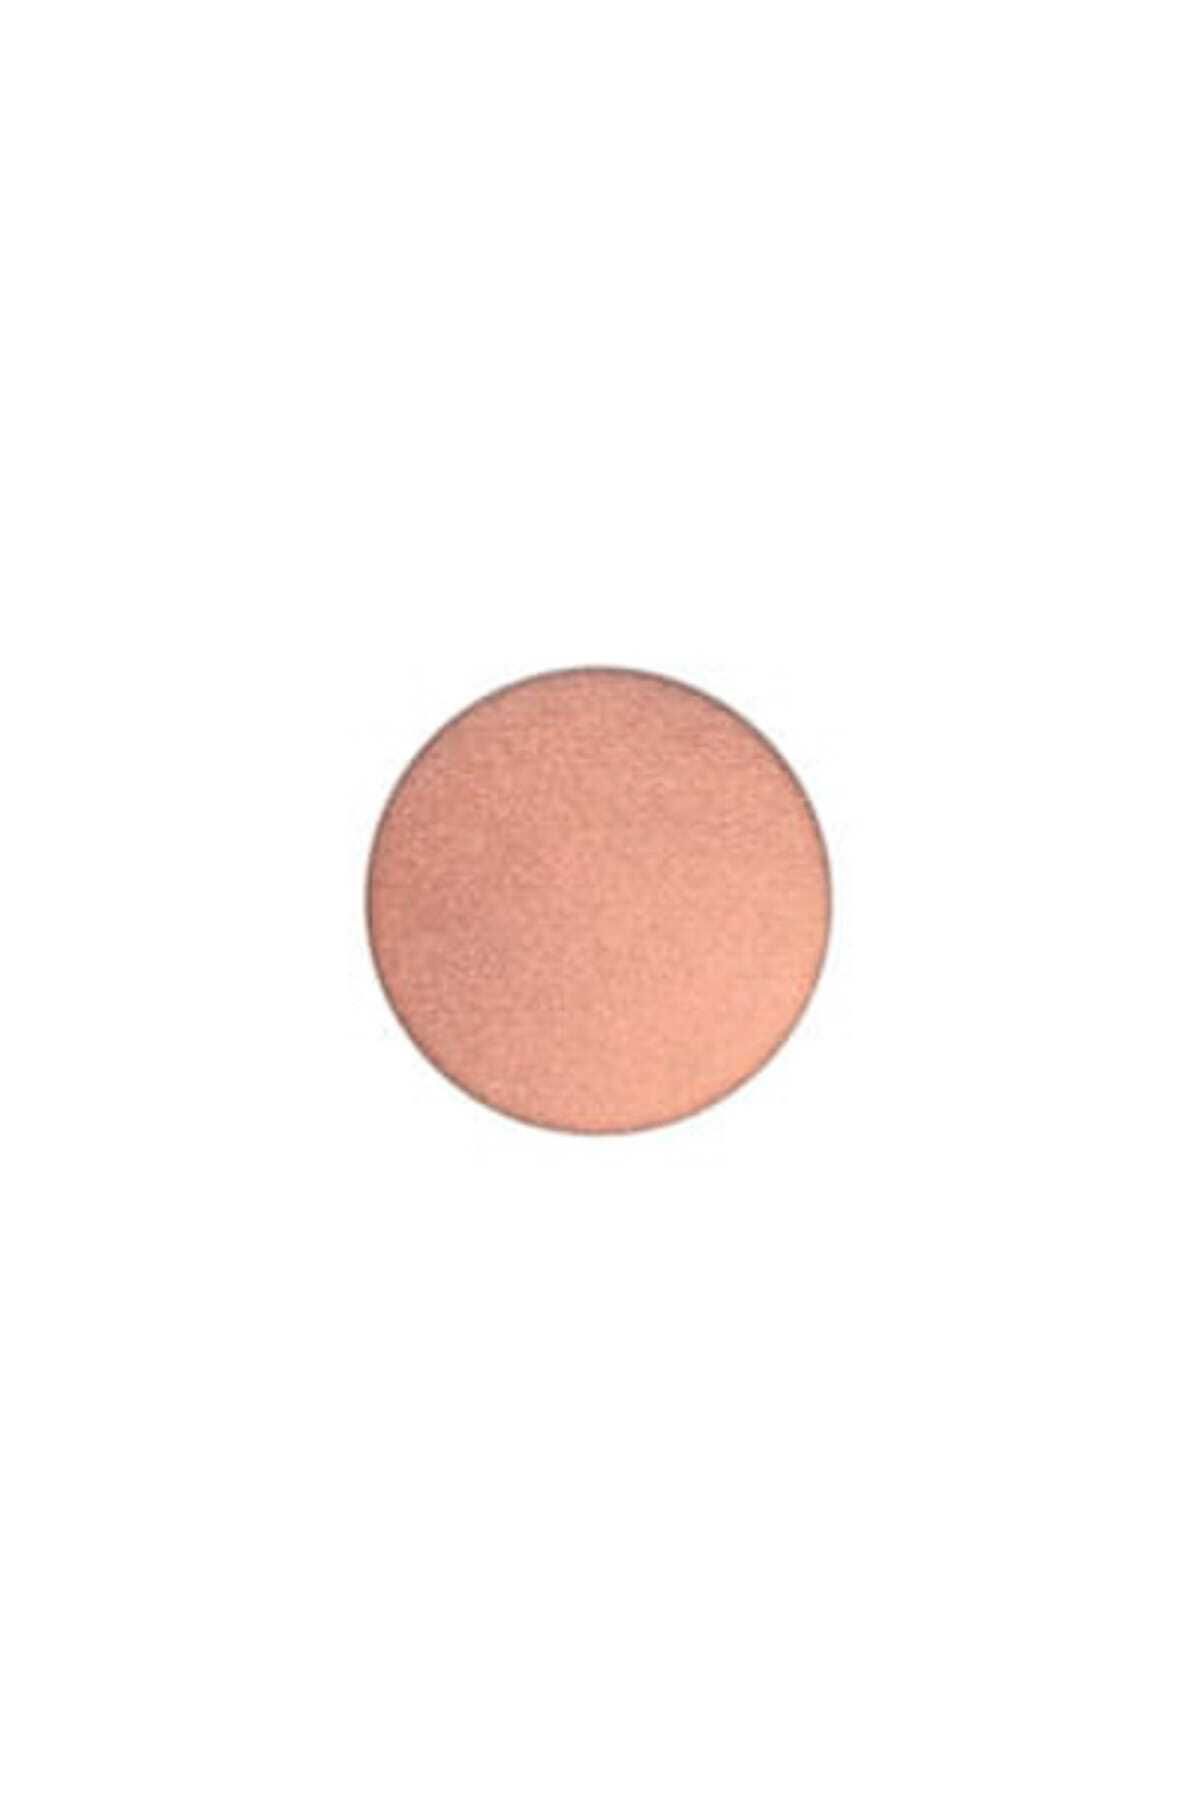 Mac ATTRACTIVE EYES - REFILL EYE SHADOW EXPENSIVE PINK EYE SHADOW 1.3 G PSSN1061